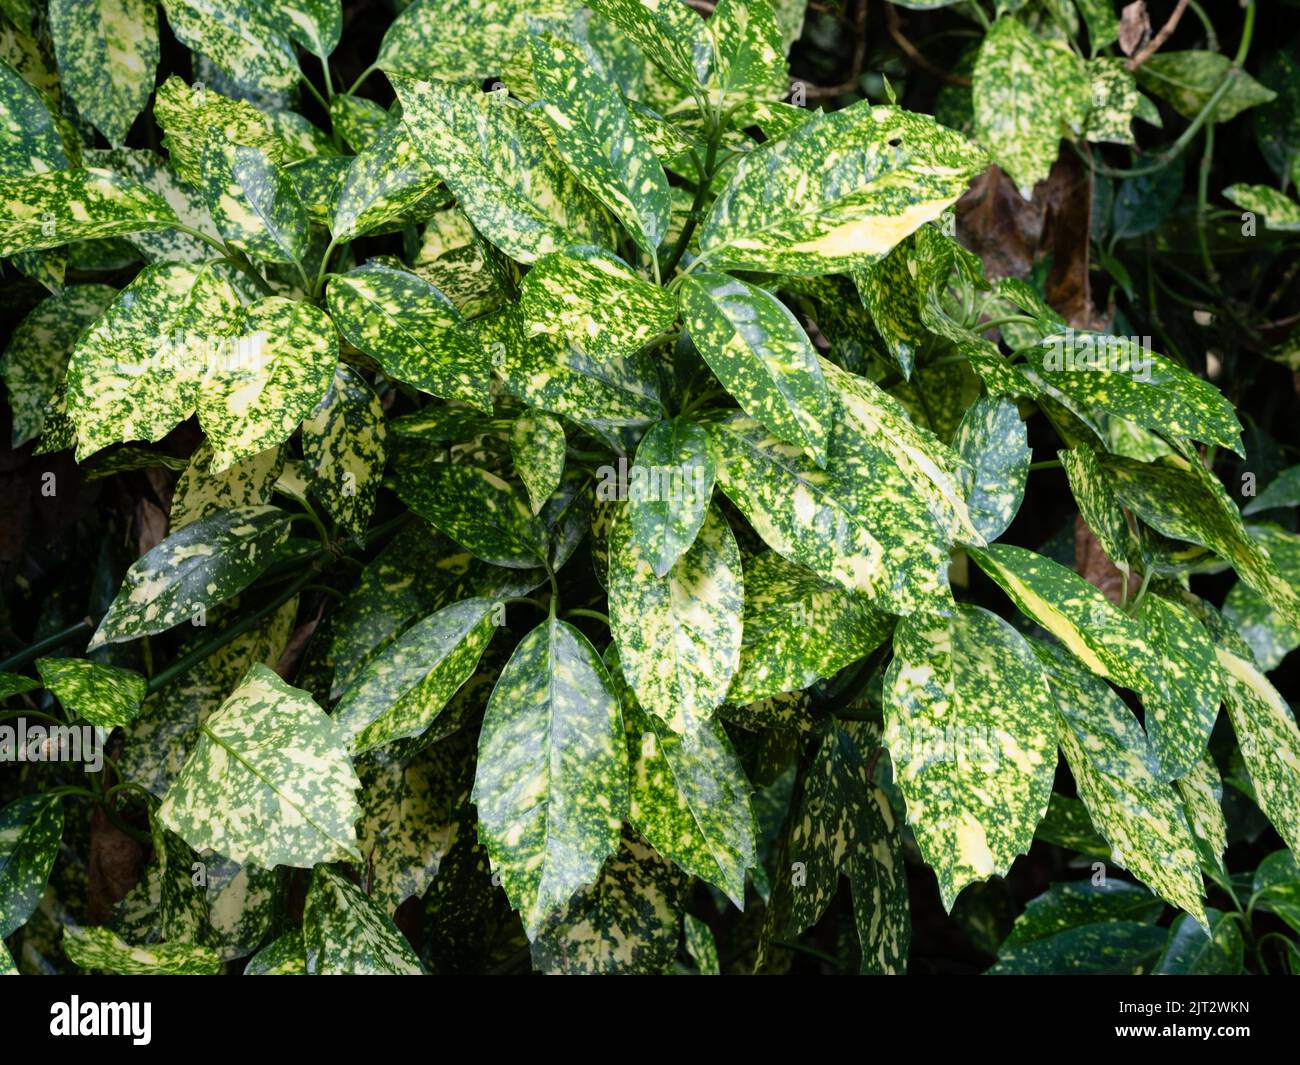 Heavily yellow spotted foliage of the hardy variegated evergreen shrub, Aucuba japonica 'Marmorata' Stock Photo